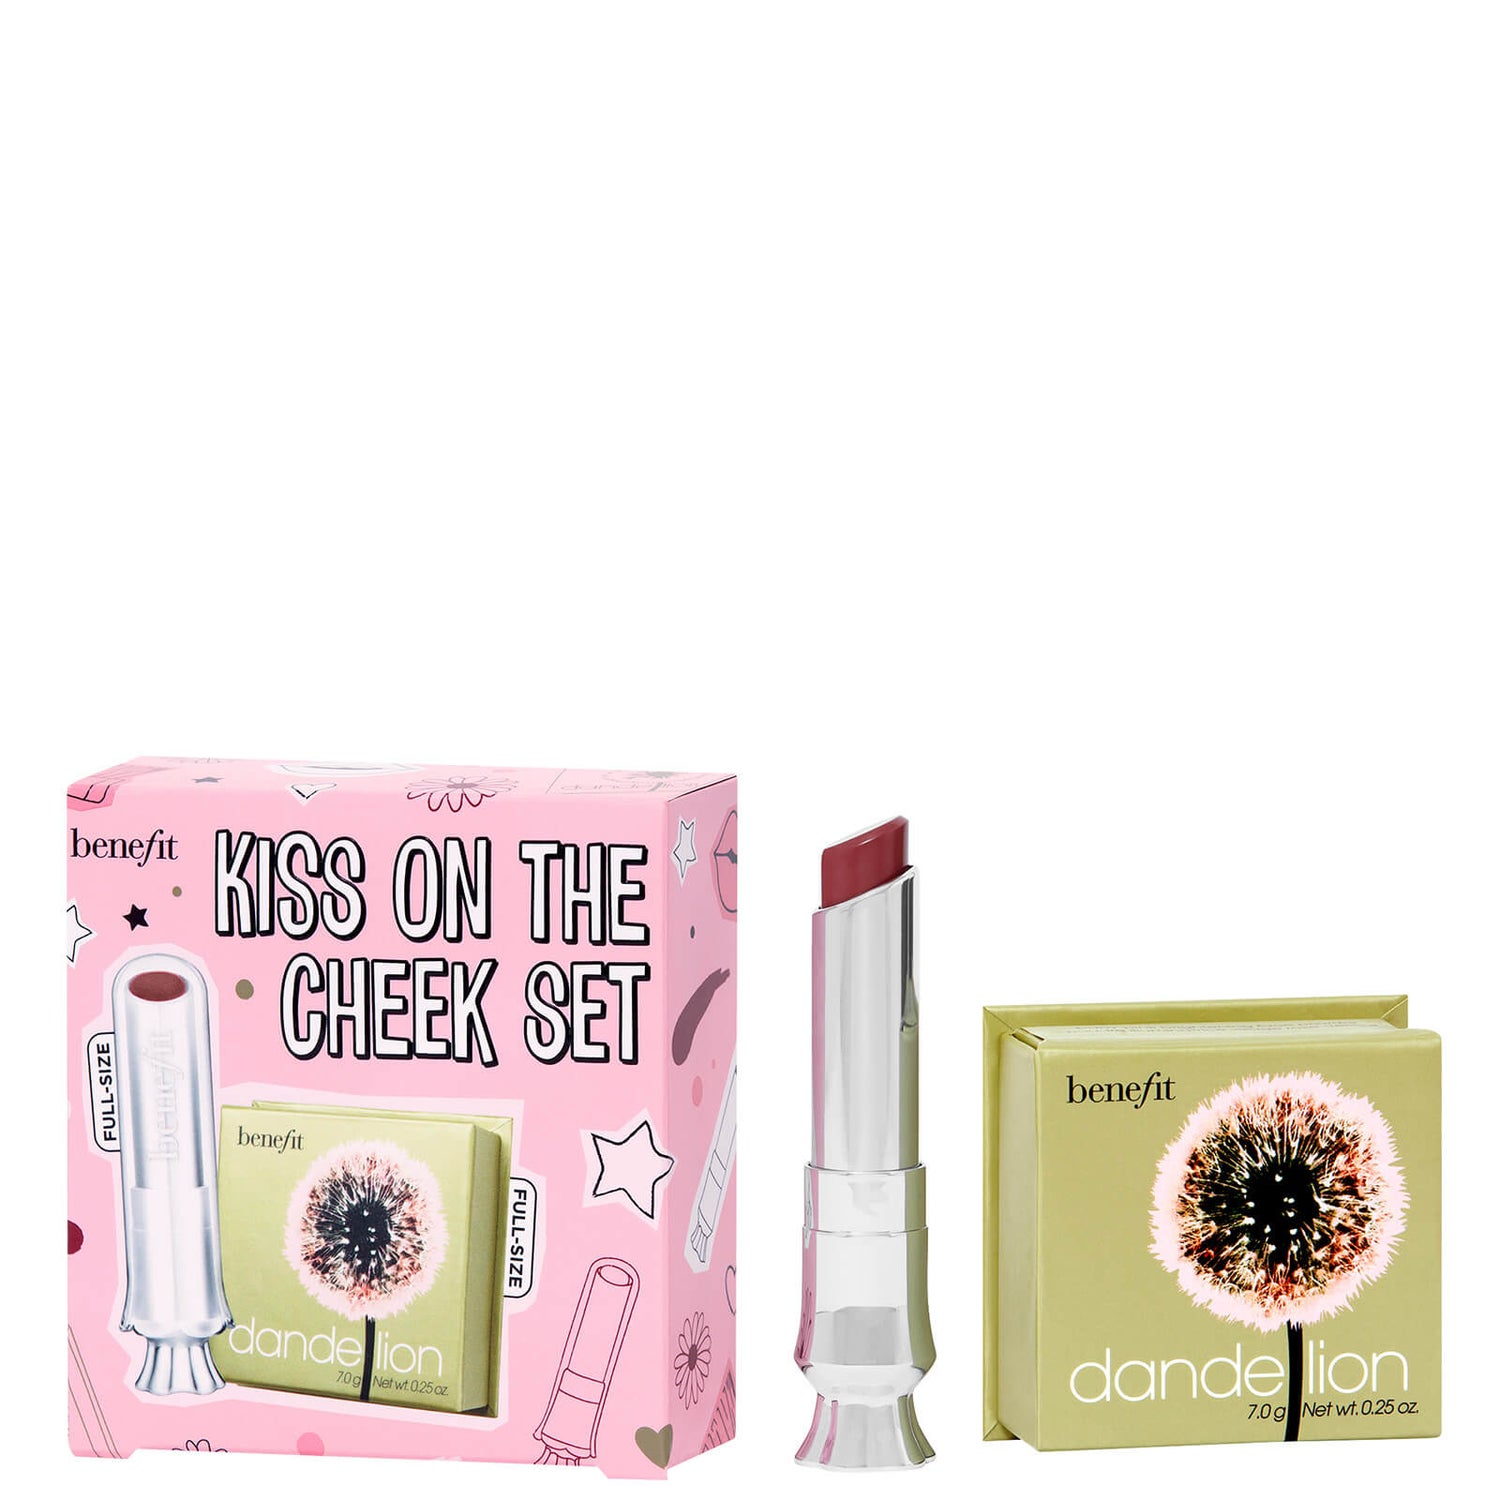 benefit Kiss on the Cheek Colour Lip Balm and Brightening Blush Duo (Worth £46.00)